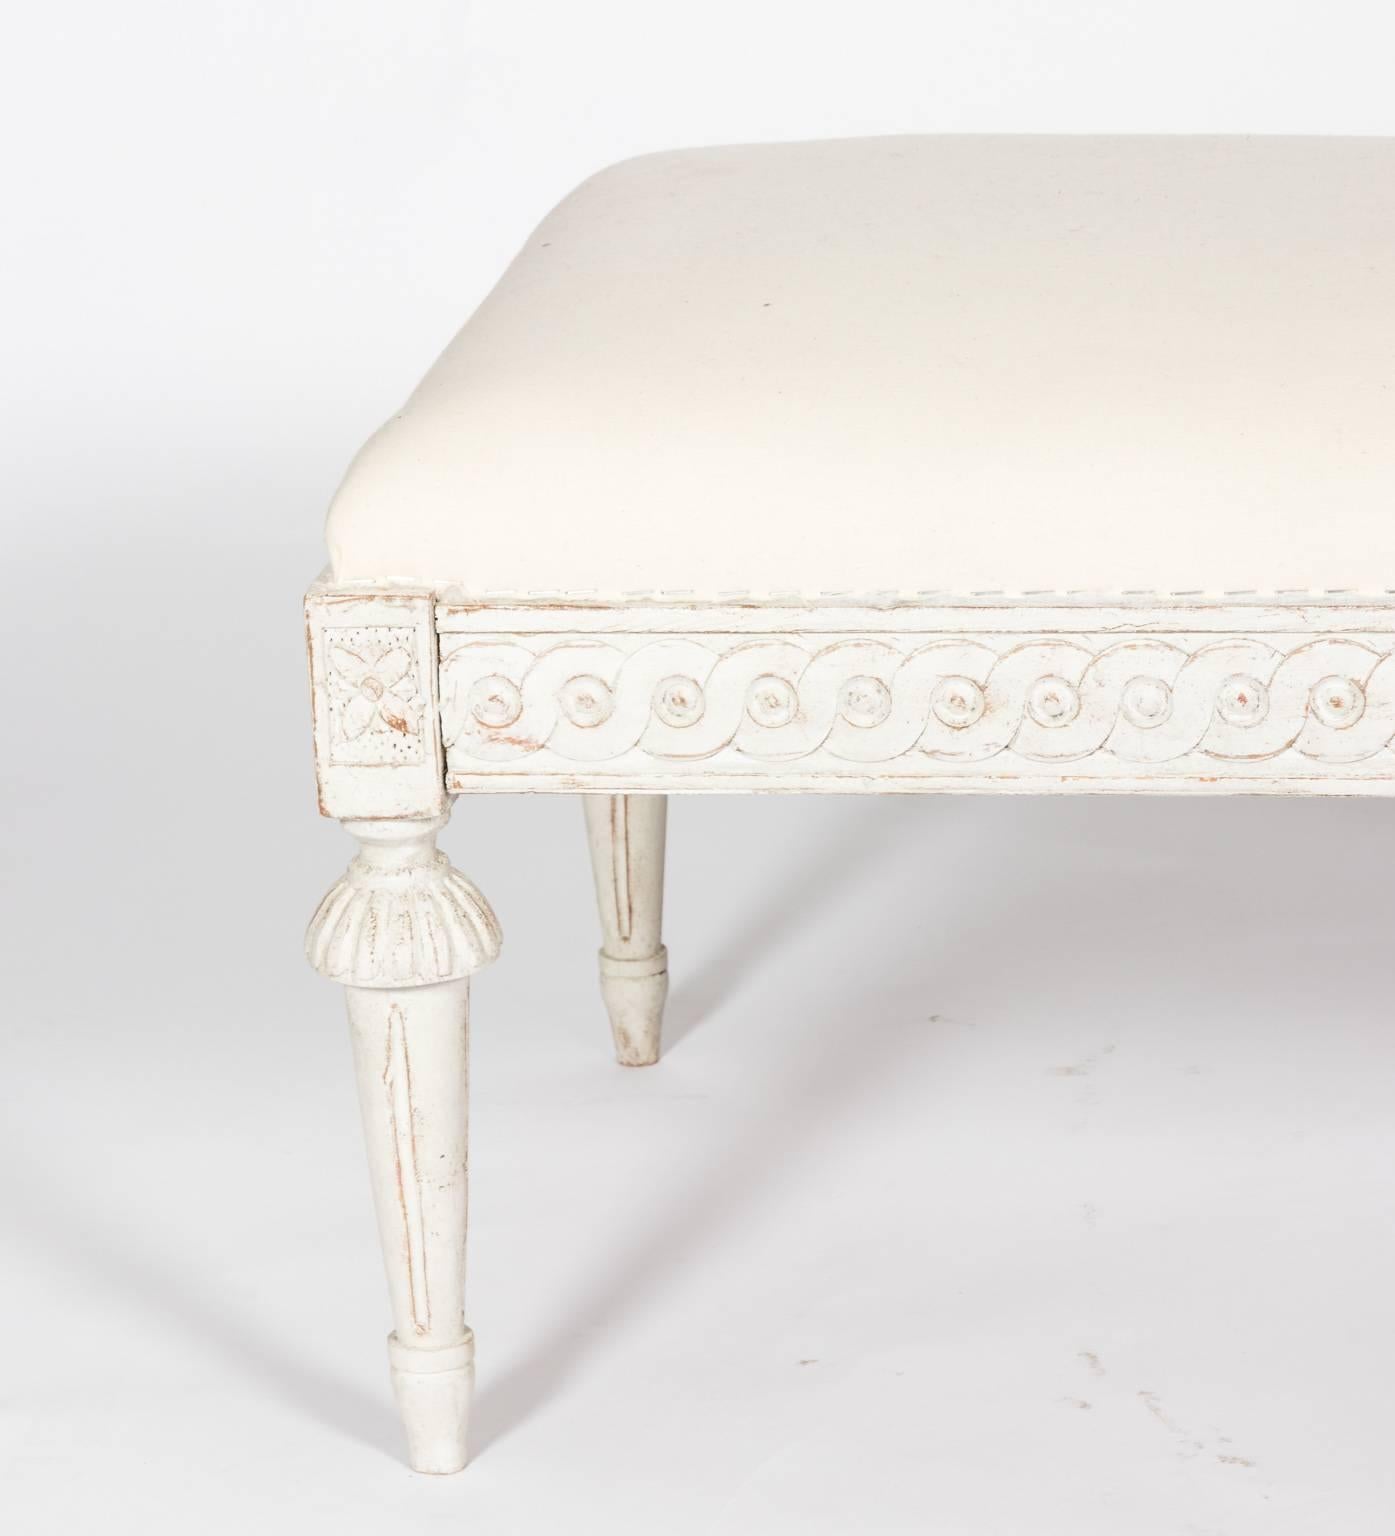 Gustavian white painted bench with guilloche trim on the seat rail and trumpet turned legs, circa early 19th century.
 